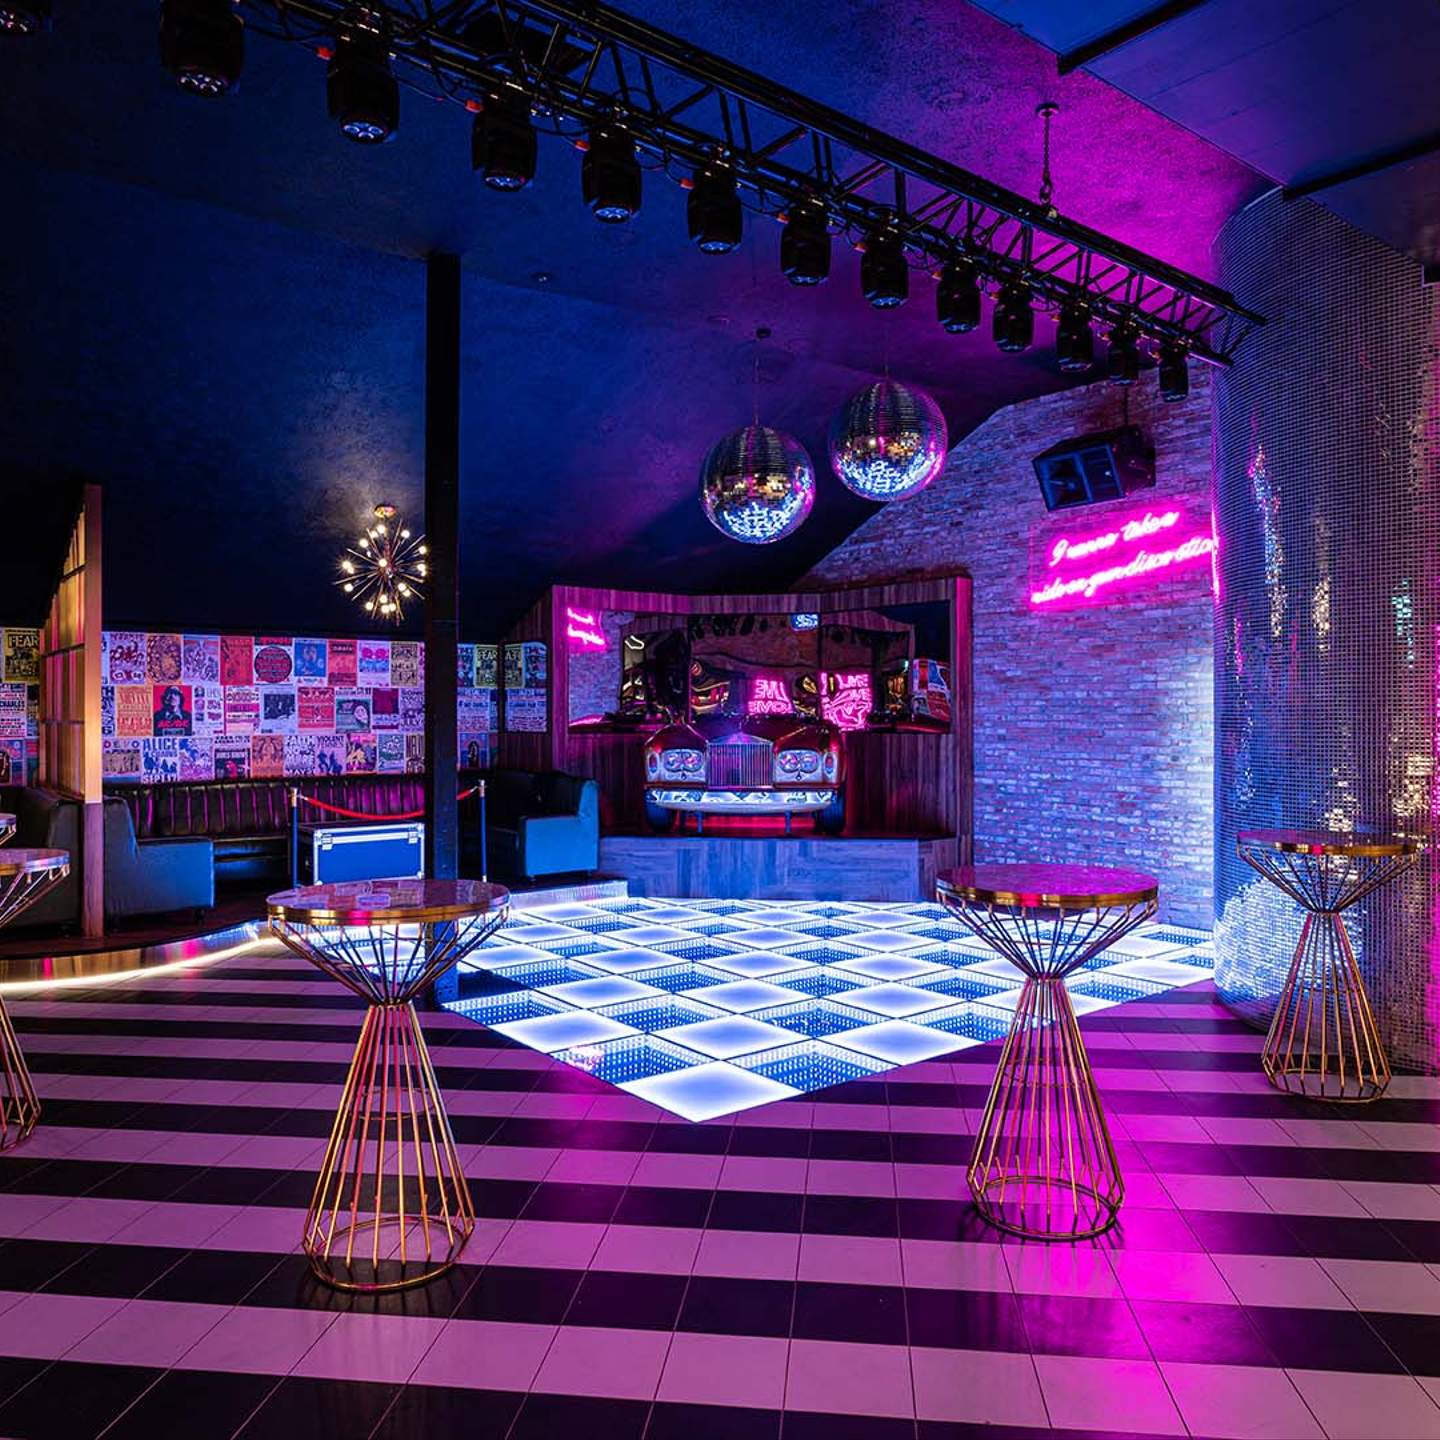 700+ Cool Nightclub Name Ideas that Bring the Party to the Dance Floor